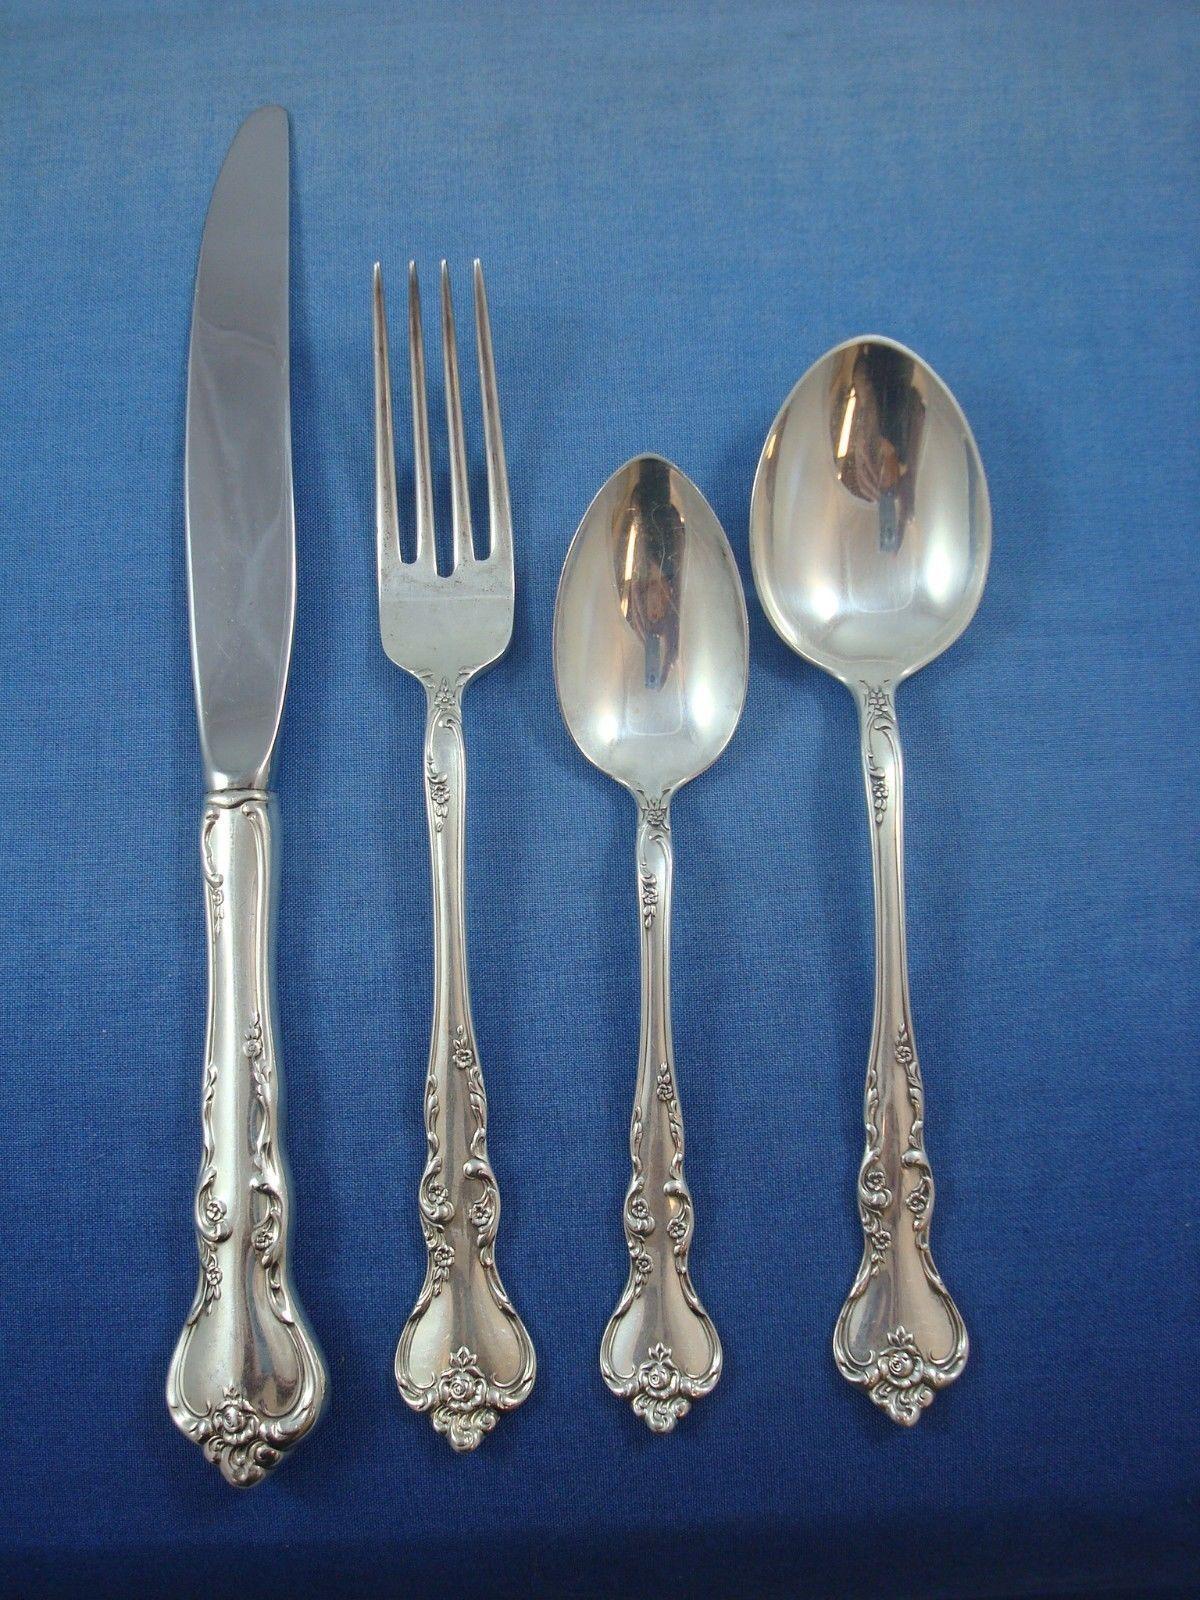 American Savannah by Reed & Barton Sterling Silver Flatware Service for 12 Set 65 Piece For Sale